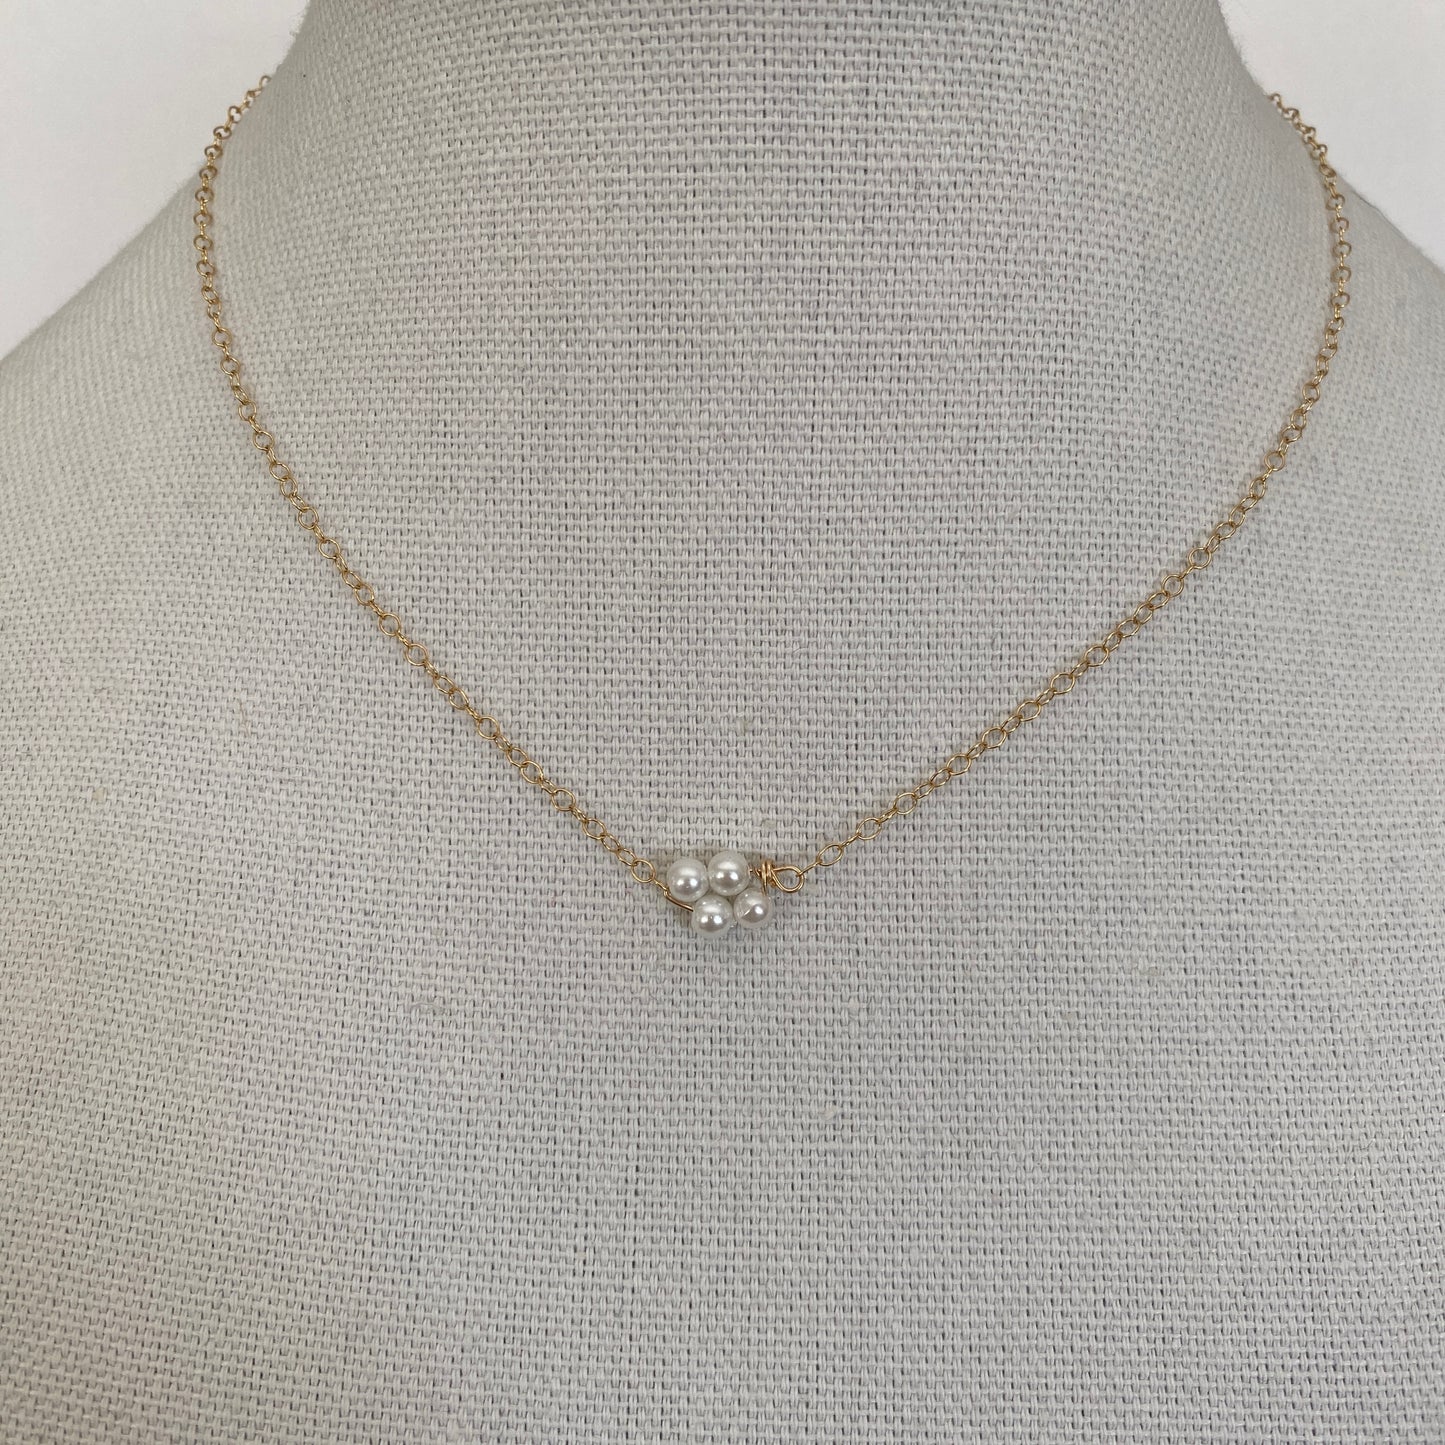 Pearl, Delicate, Rosette, Dainty, Gold, Necklace